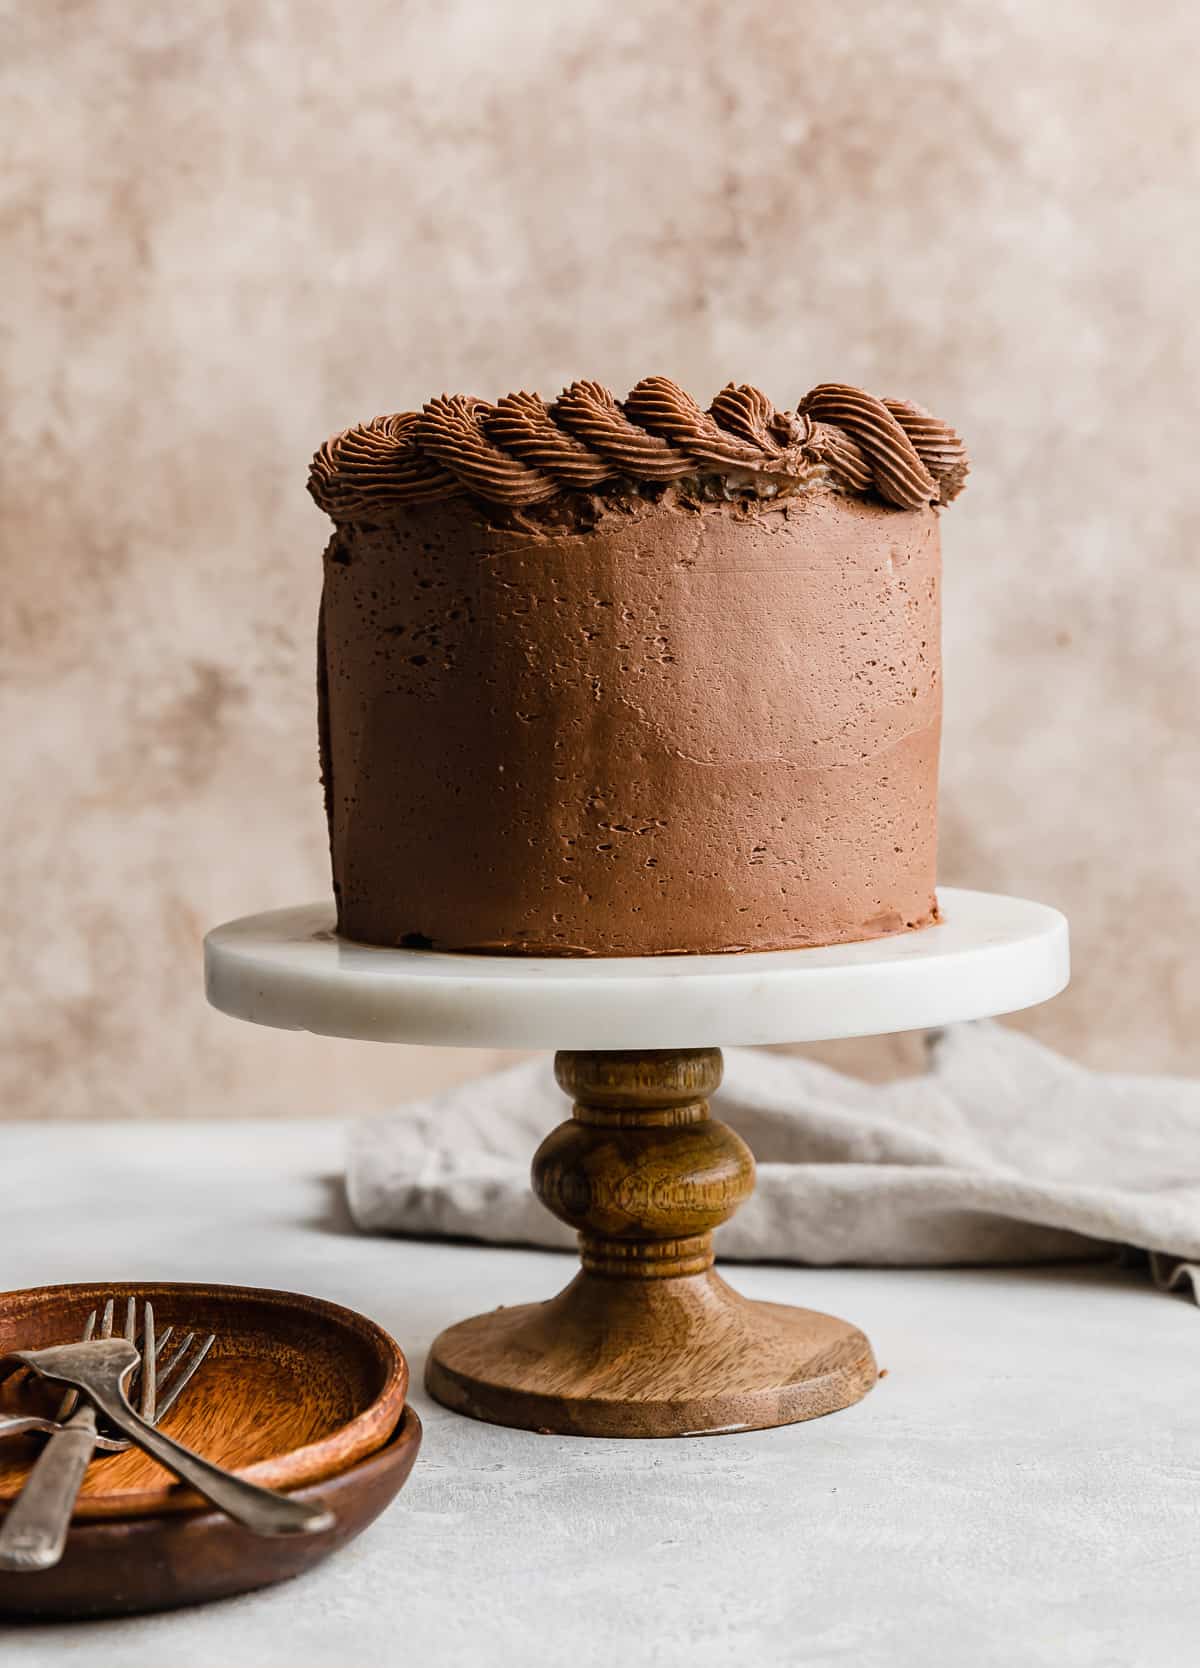 Chocolate buttercream frosting covering a small three layer German Chocolate Cake, on a cake stand against a light brown textured background.